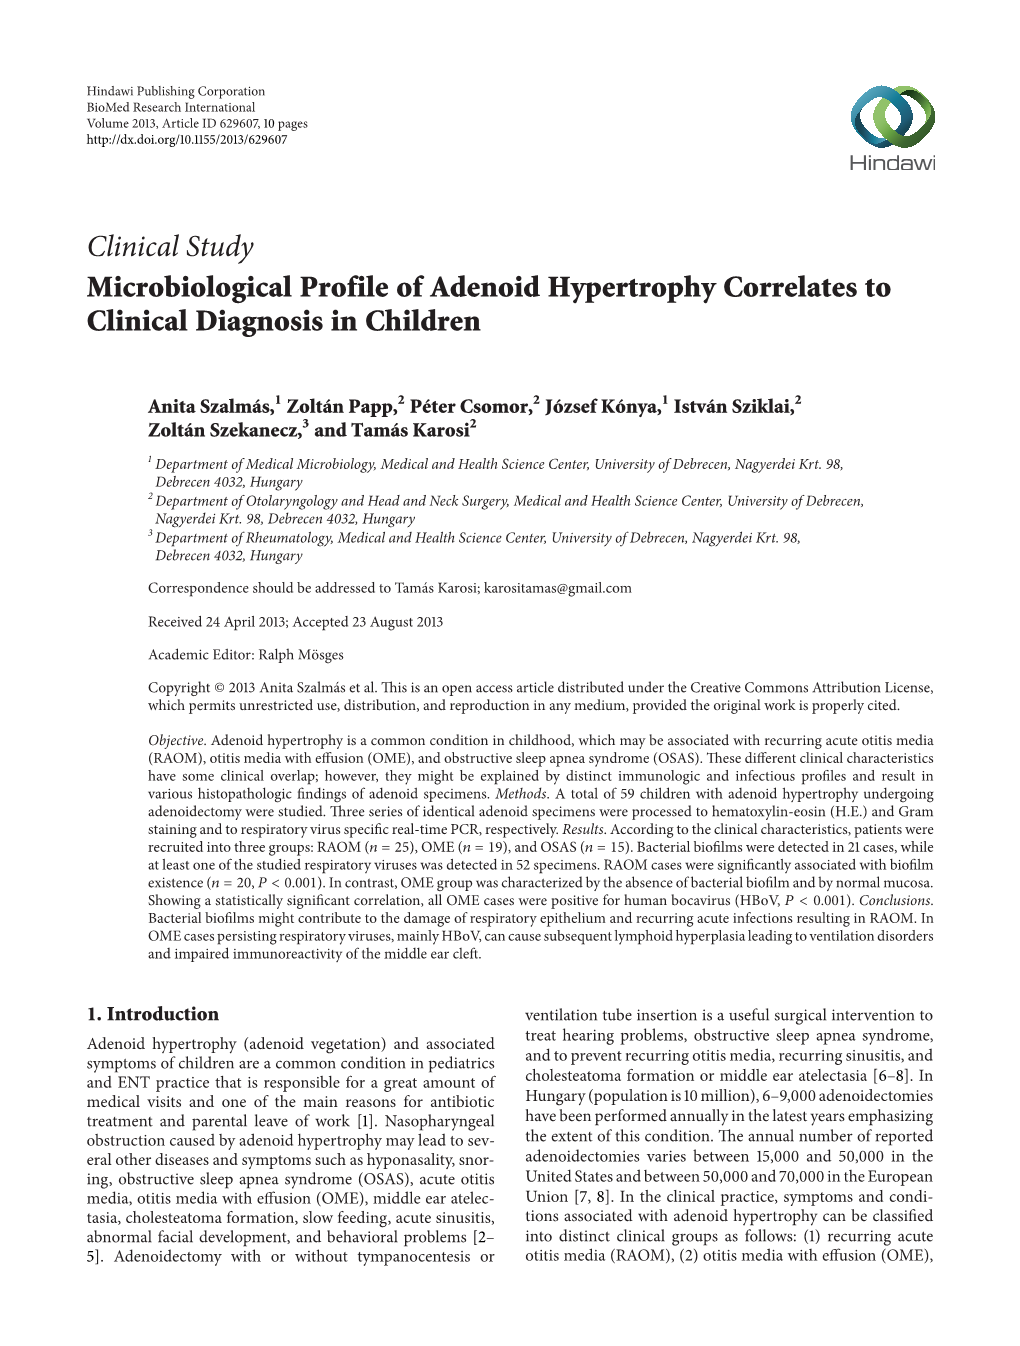 Microbiological Profile of Adenoid Hypertrophy Correlates to Clinical Diagnosis in Children